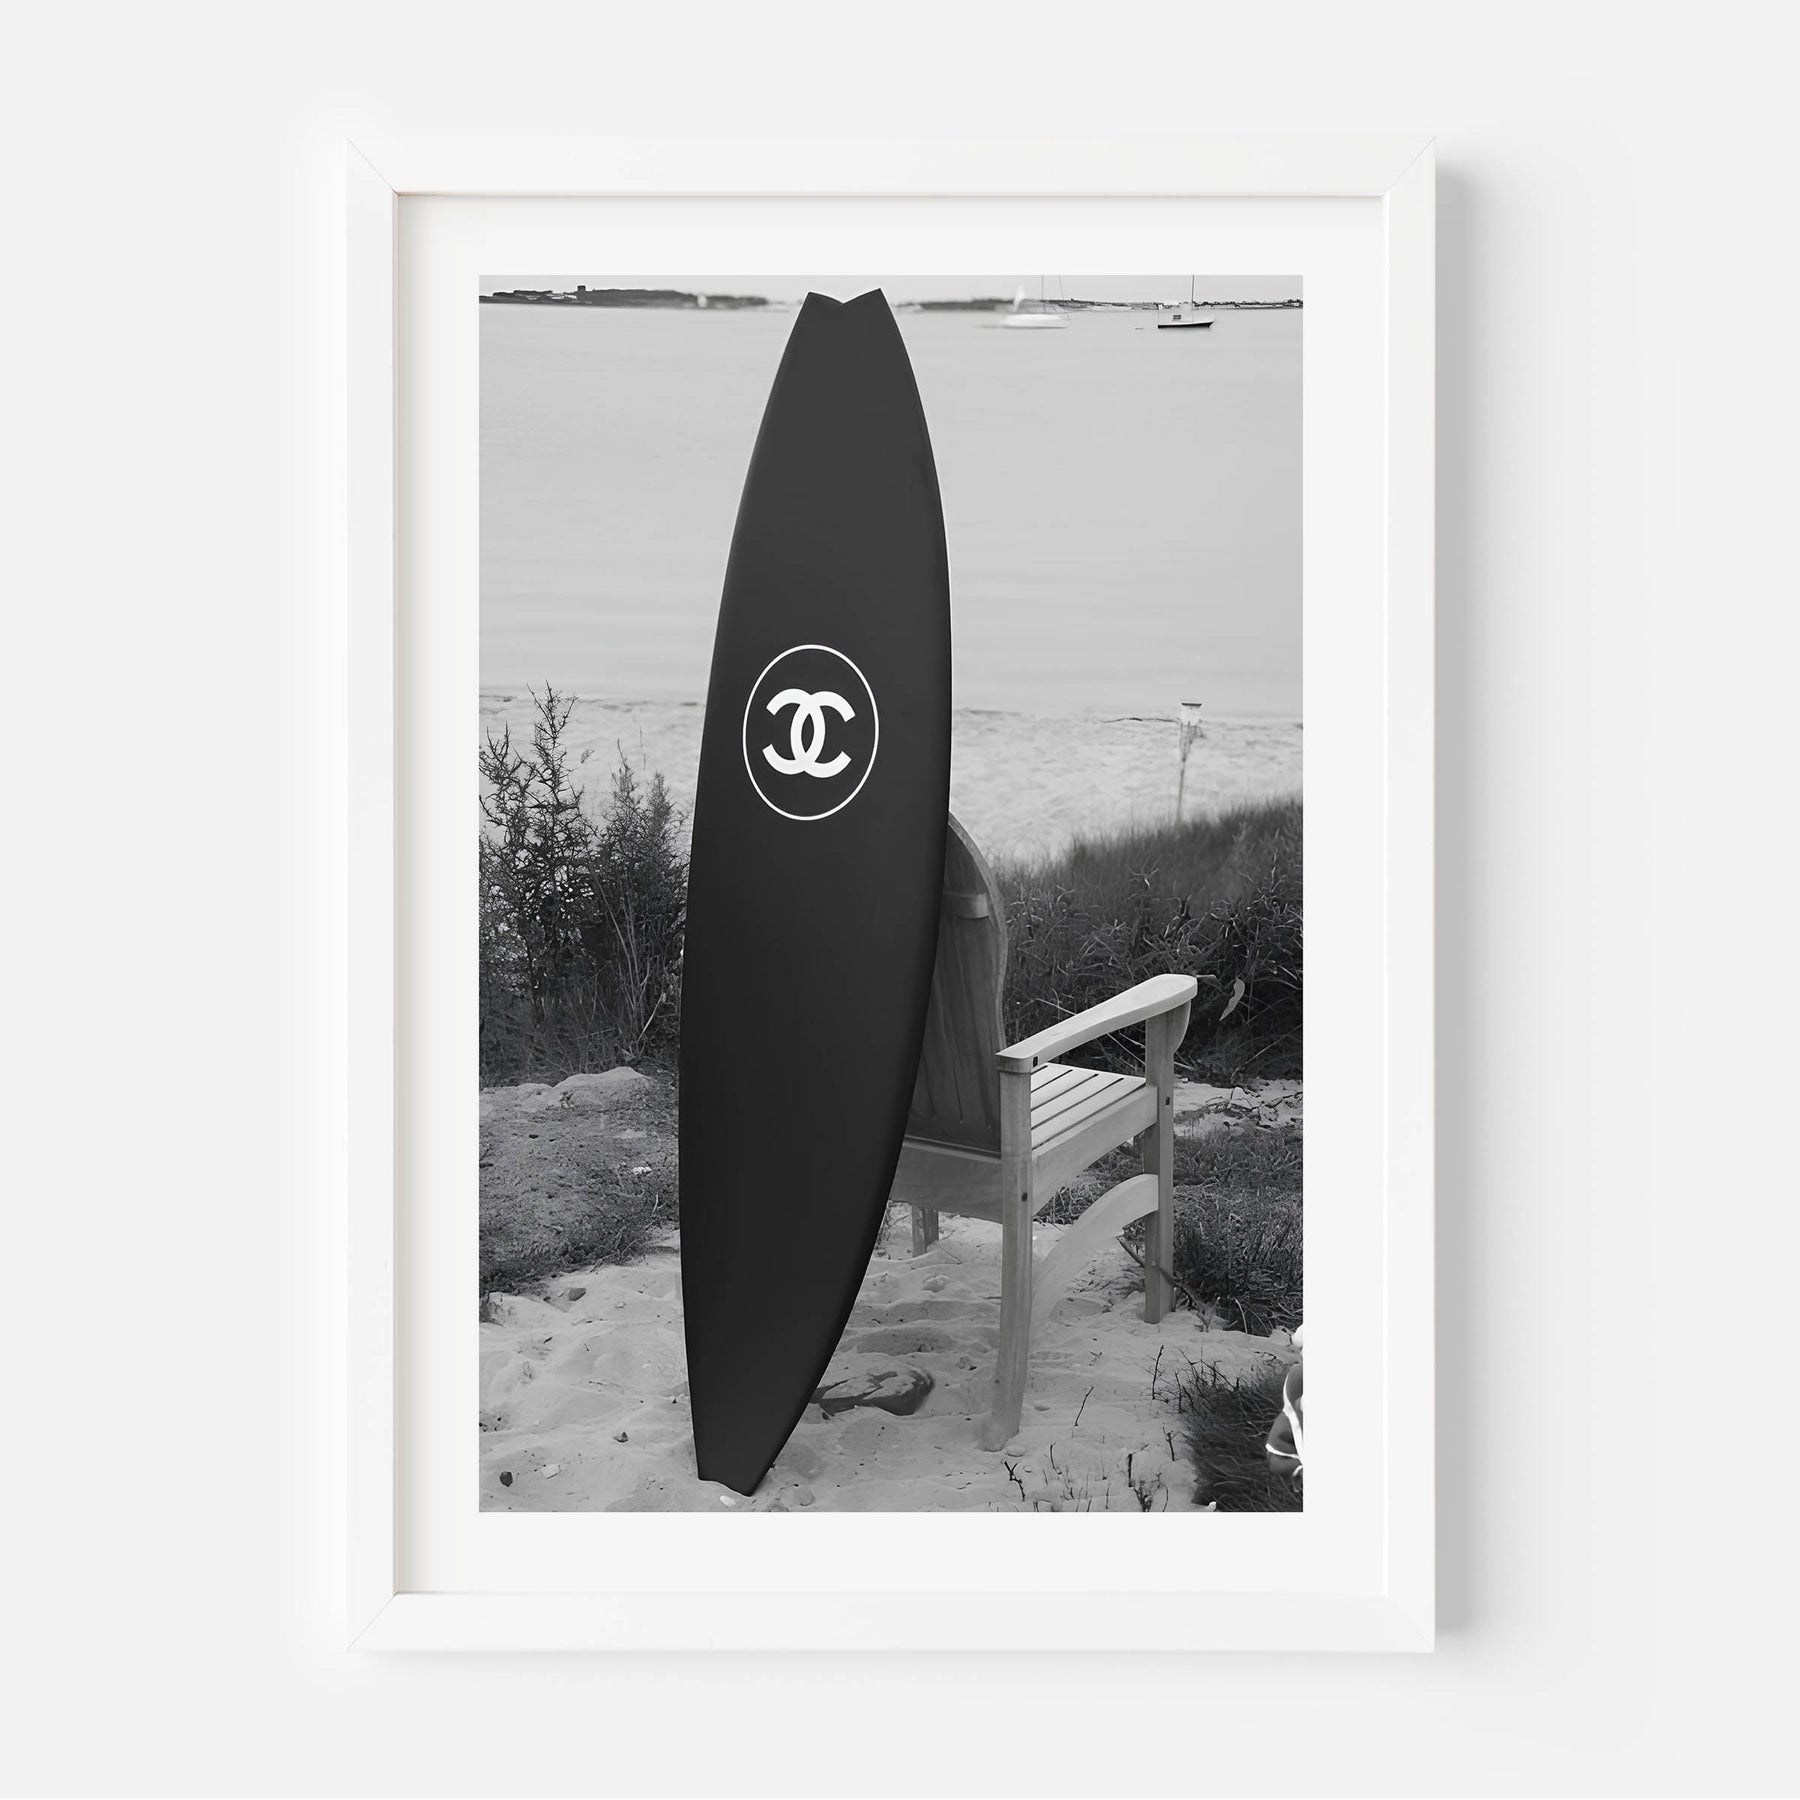 Gone Surfing Poster